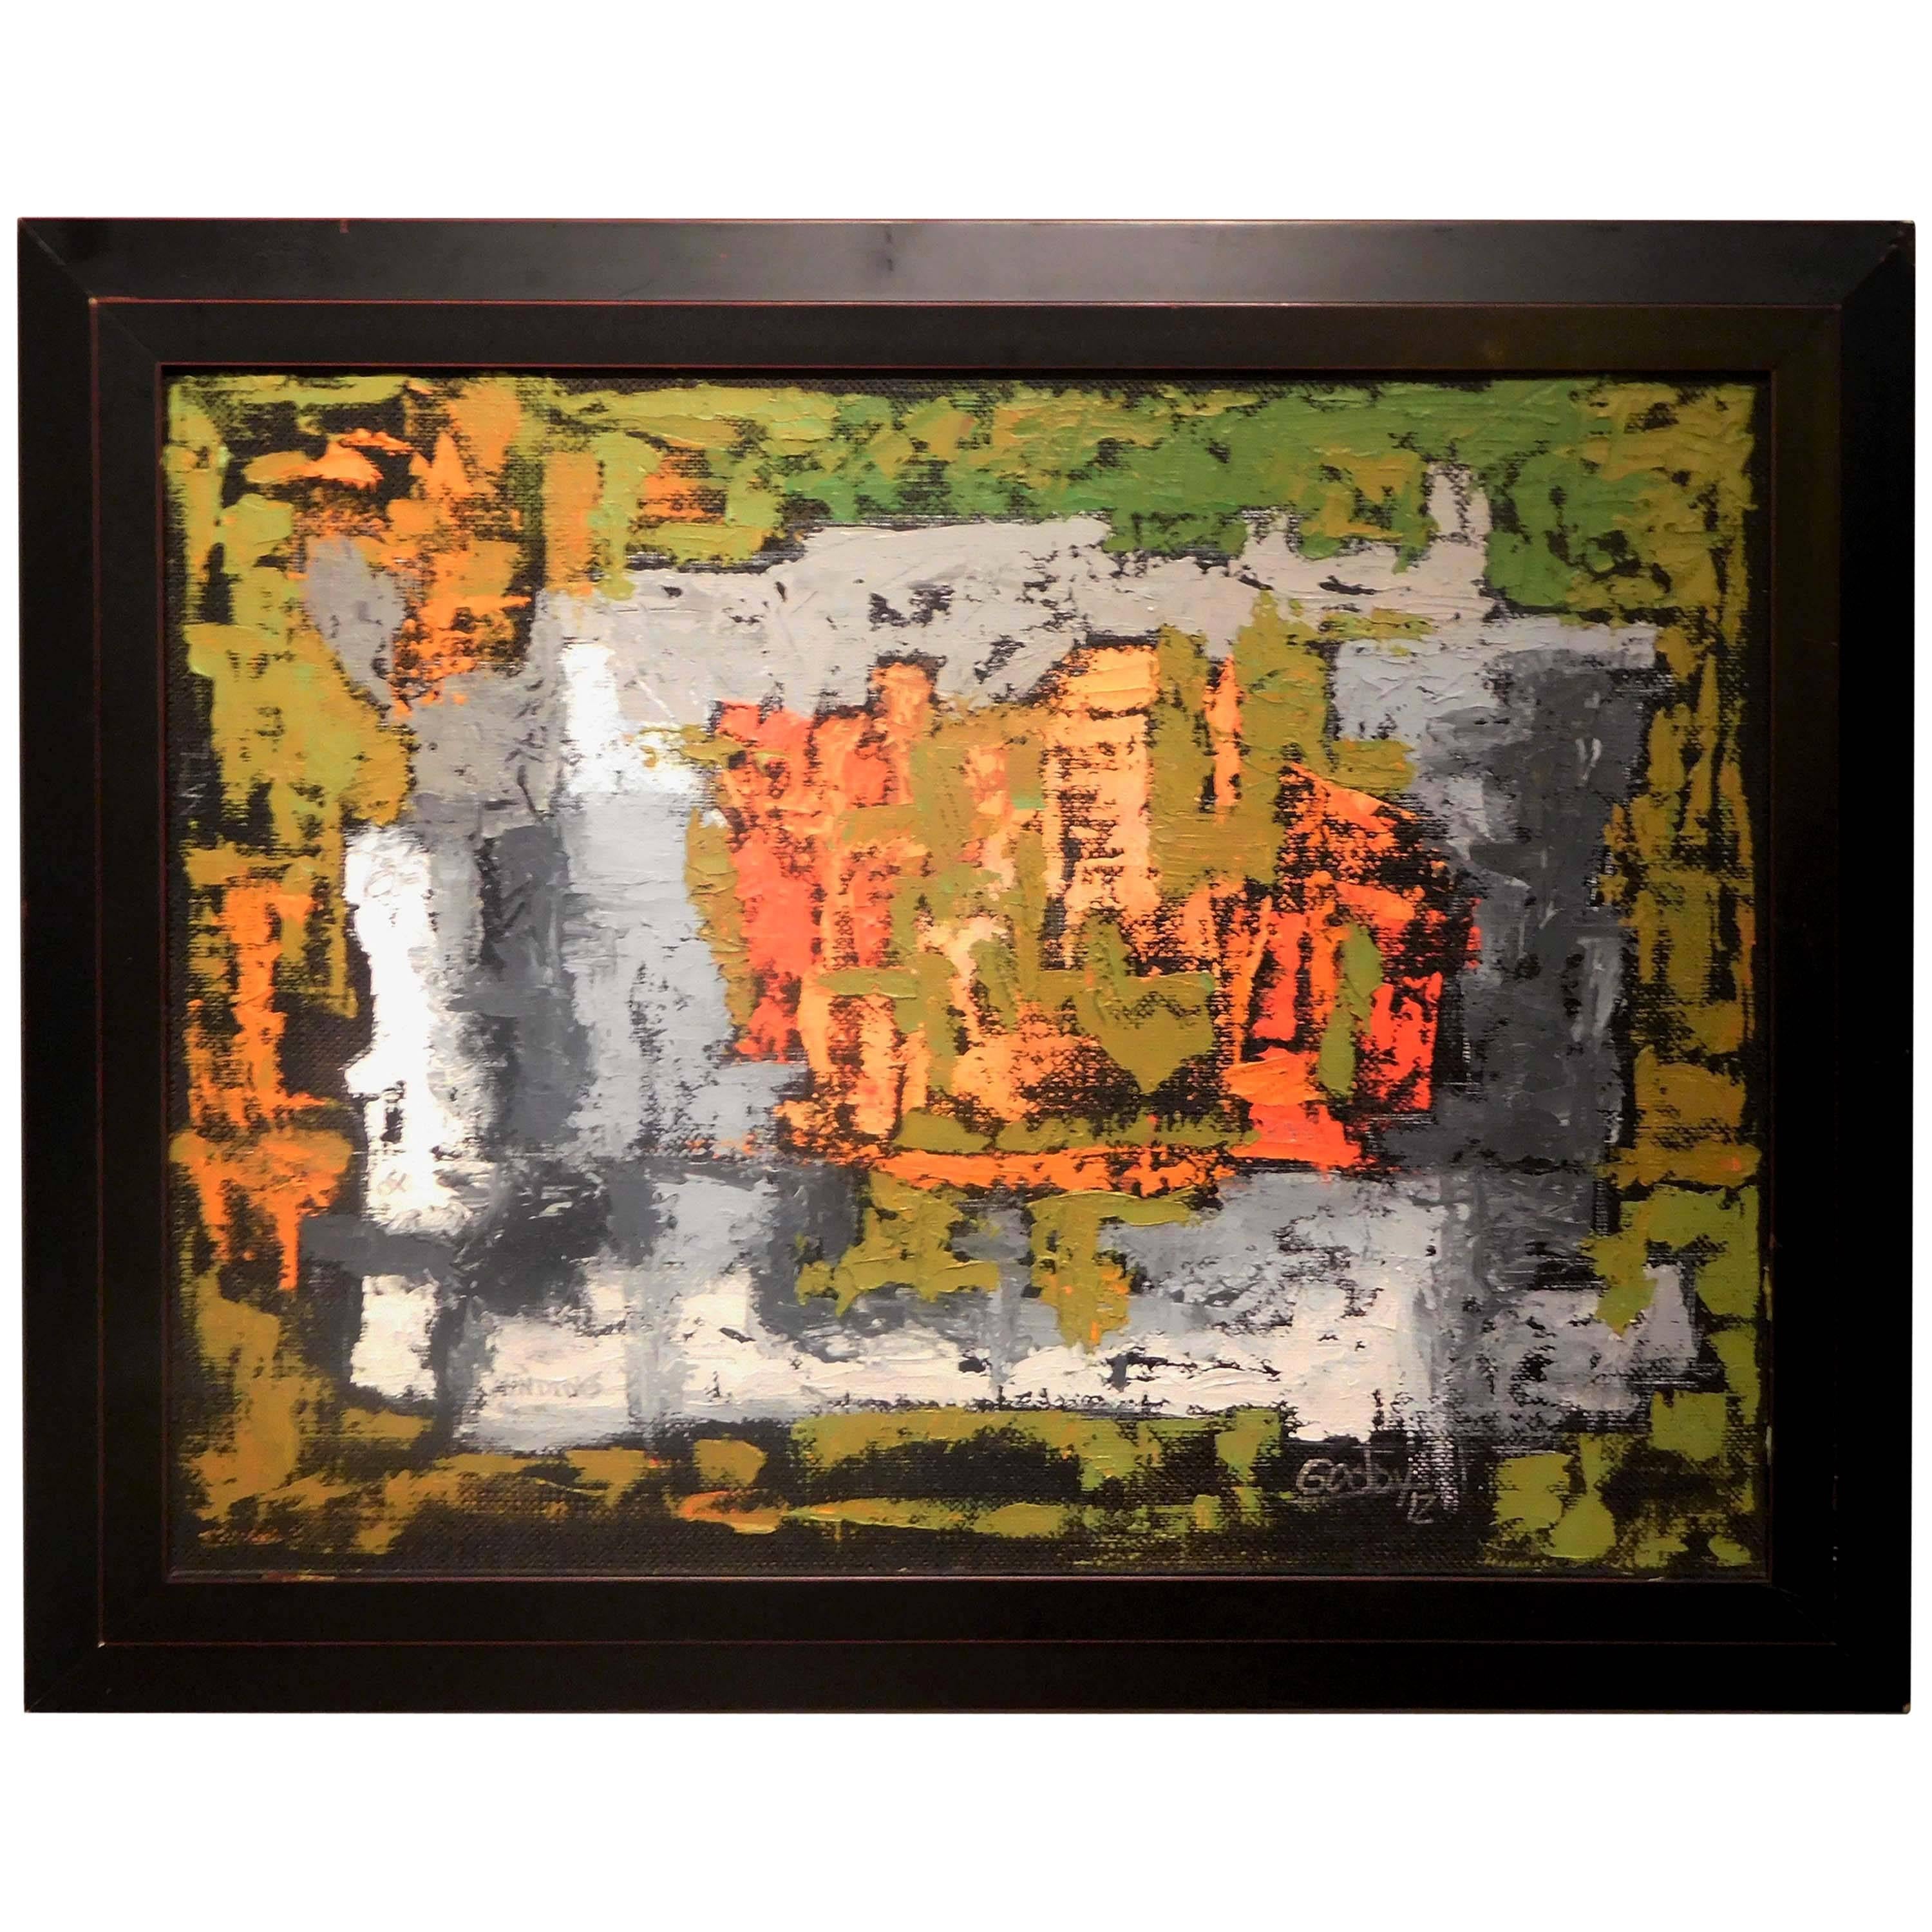 Endings, Expressionist Oil Paint on Found Frame and Burlap Mat by Godoy, 2012